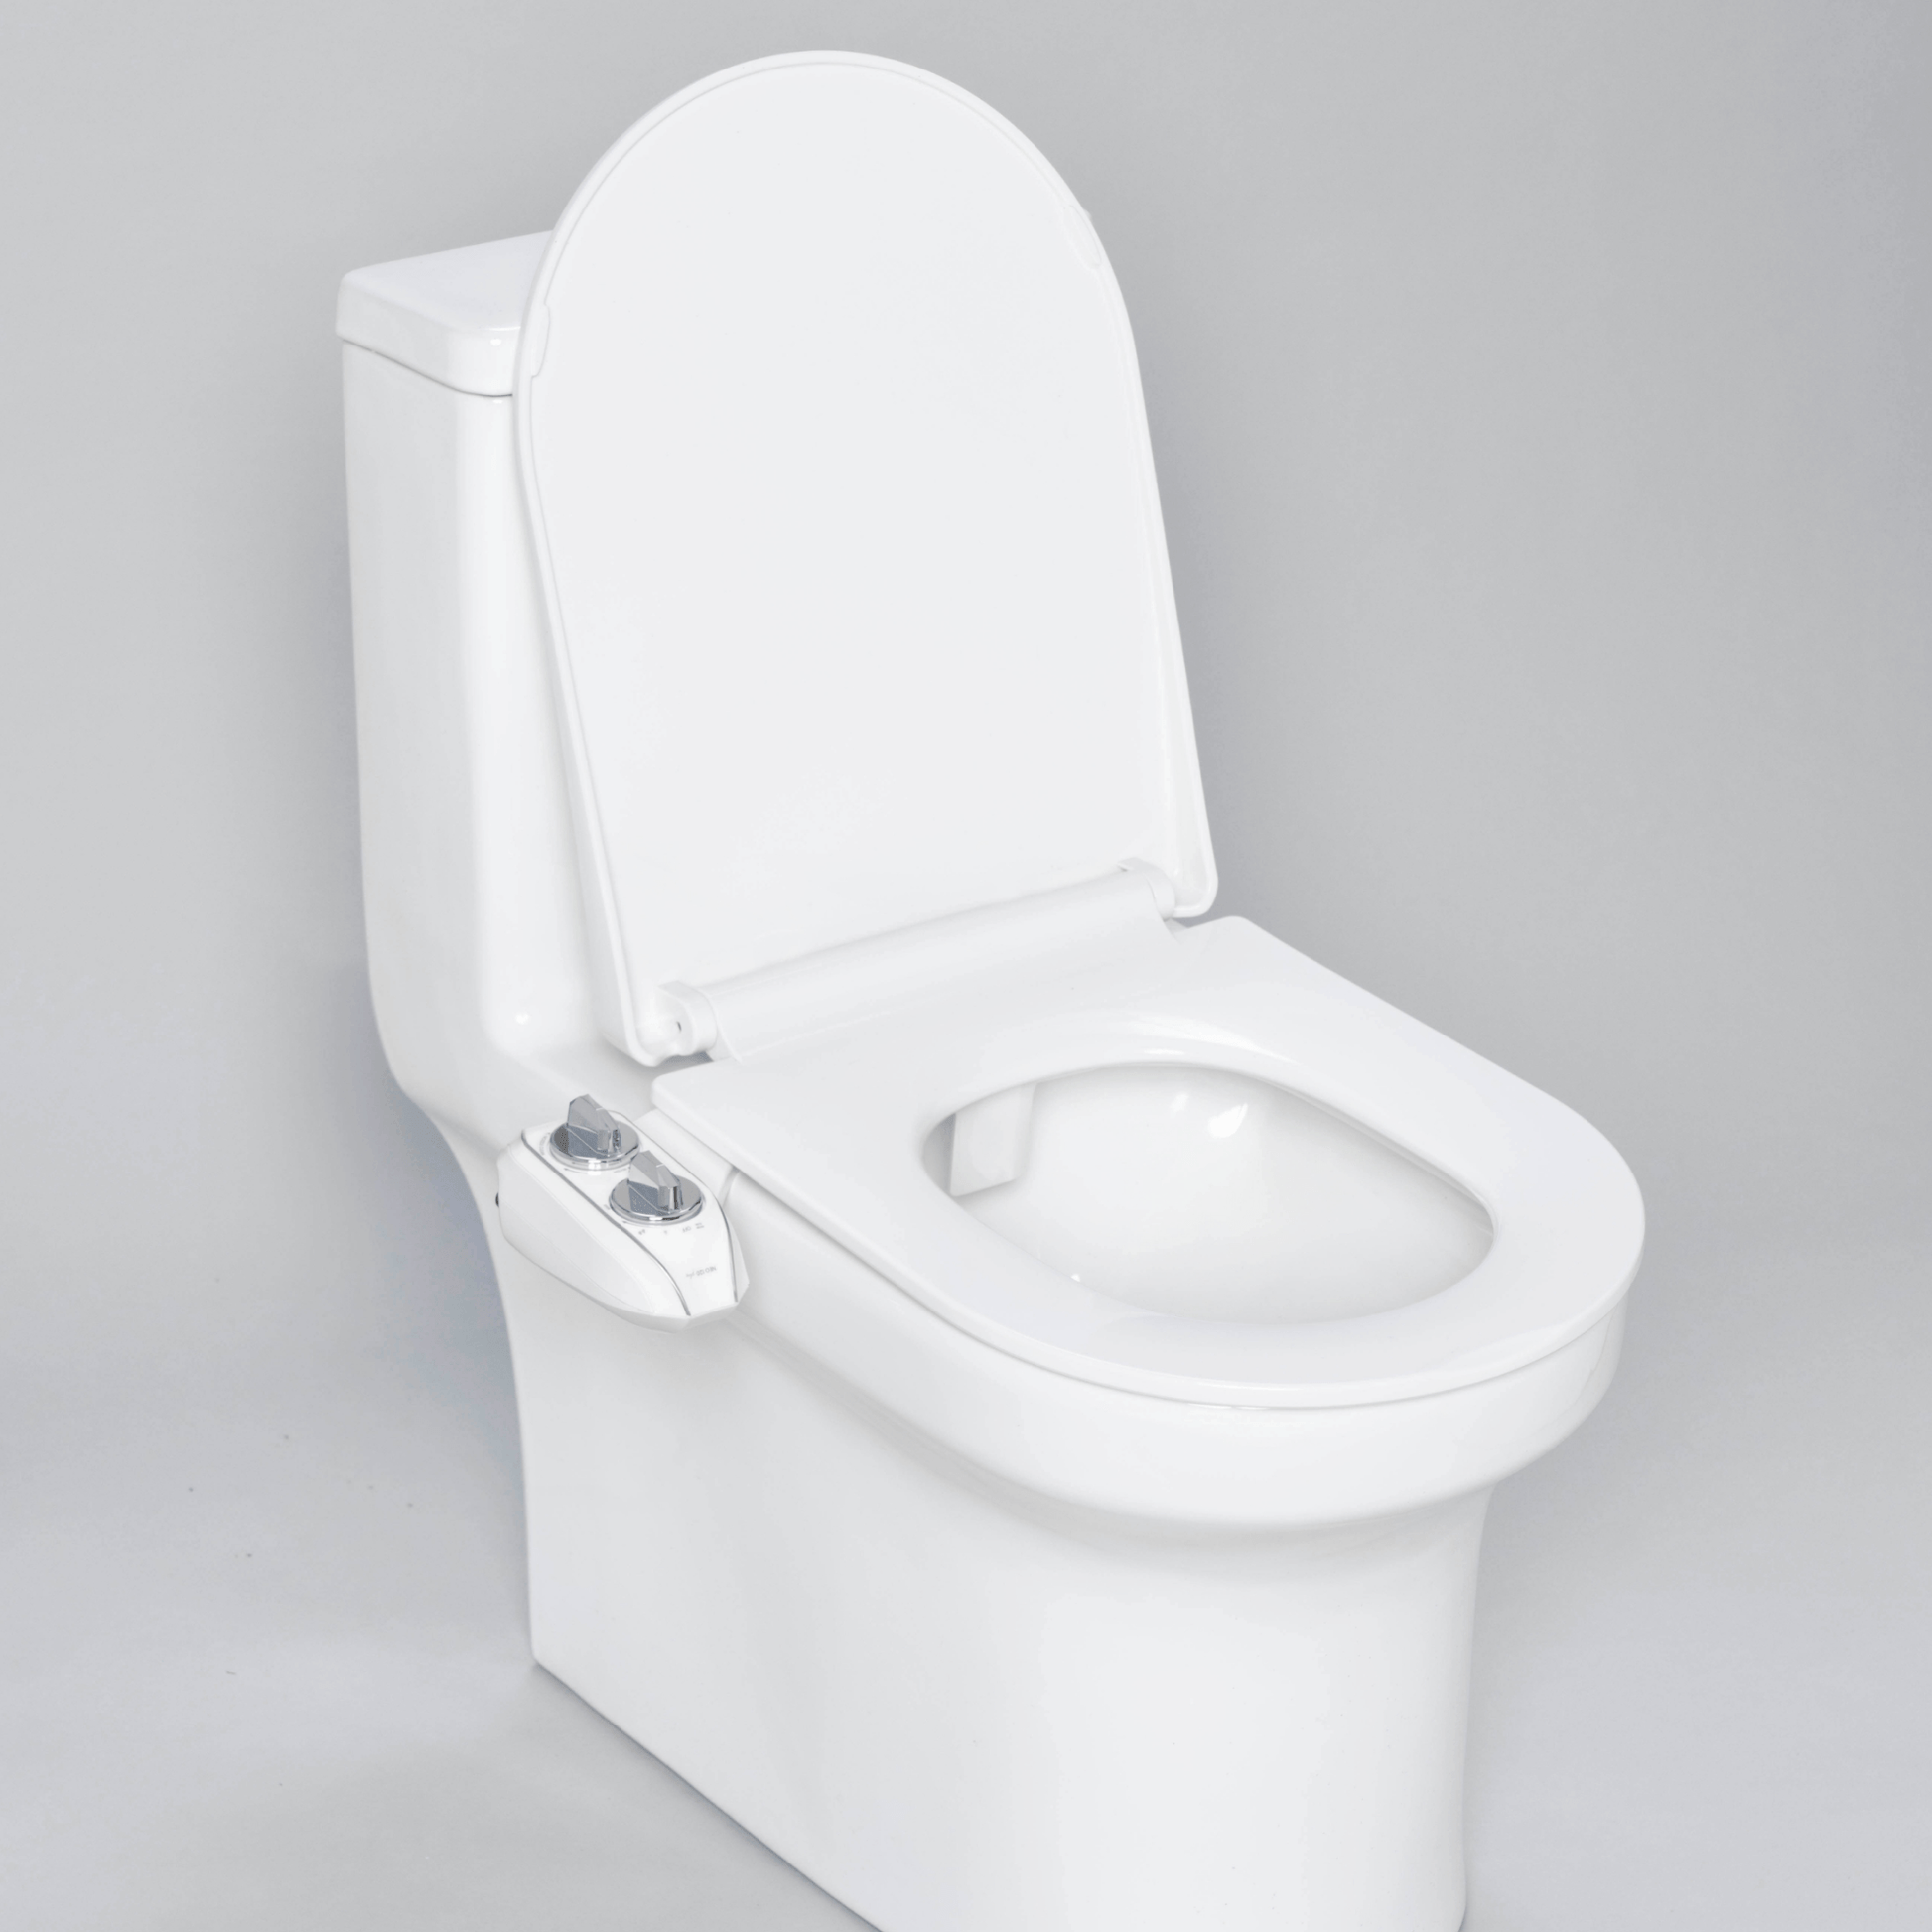 NEO 120 Plus Chrome installed on a modern toilet, with lid open